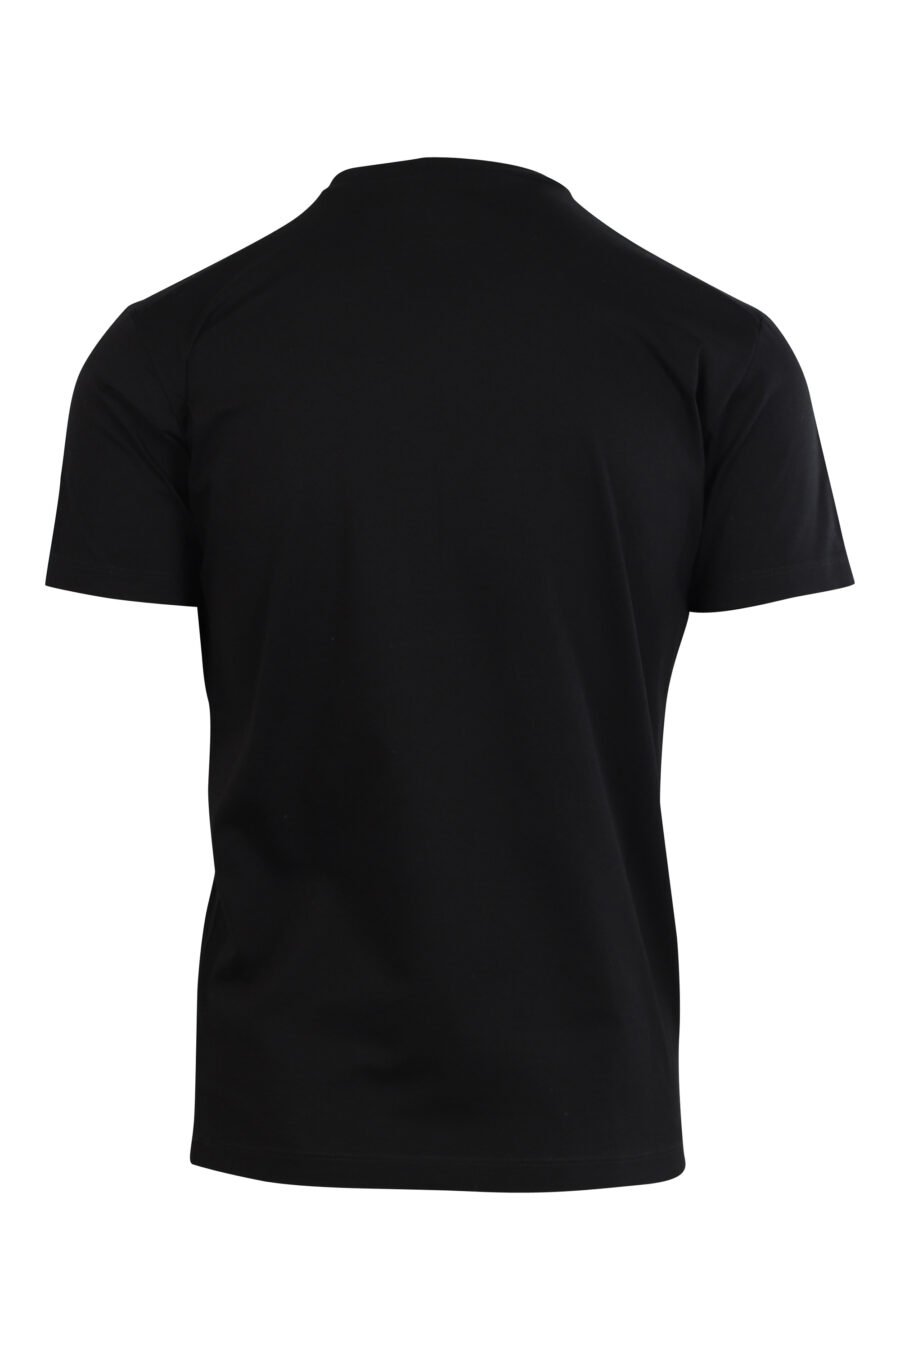 Black T-shirt with centred minilogue - 8058049841681 2